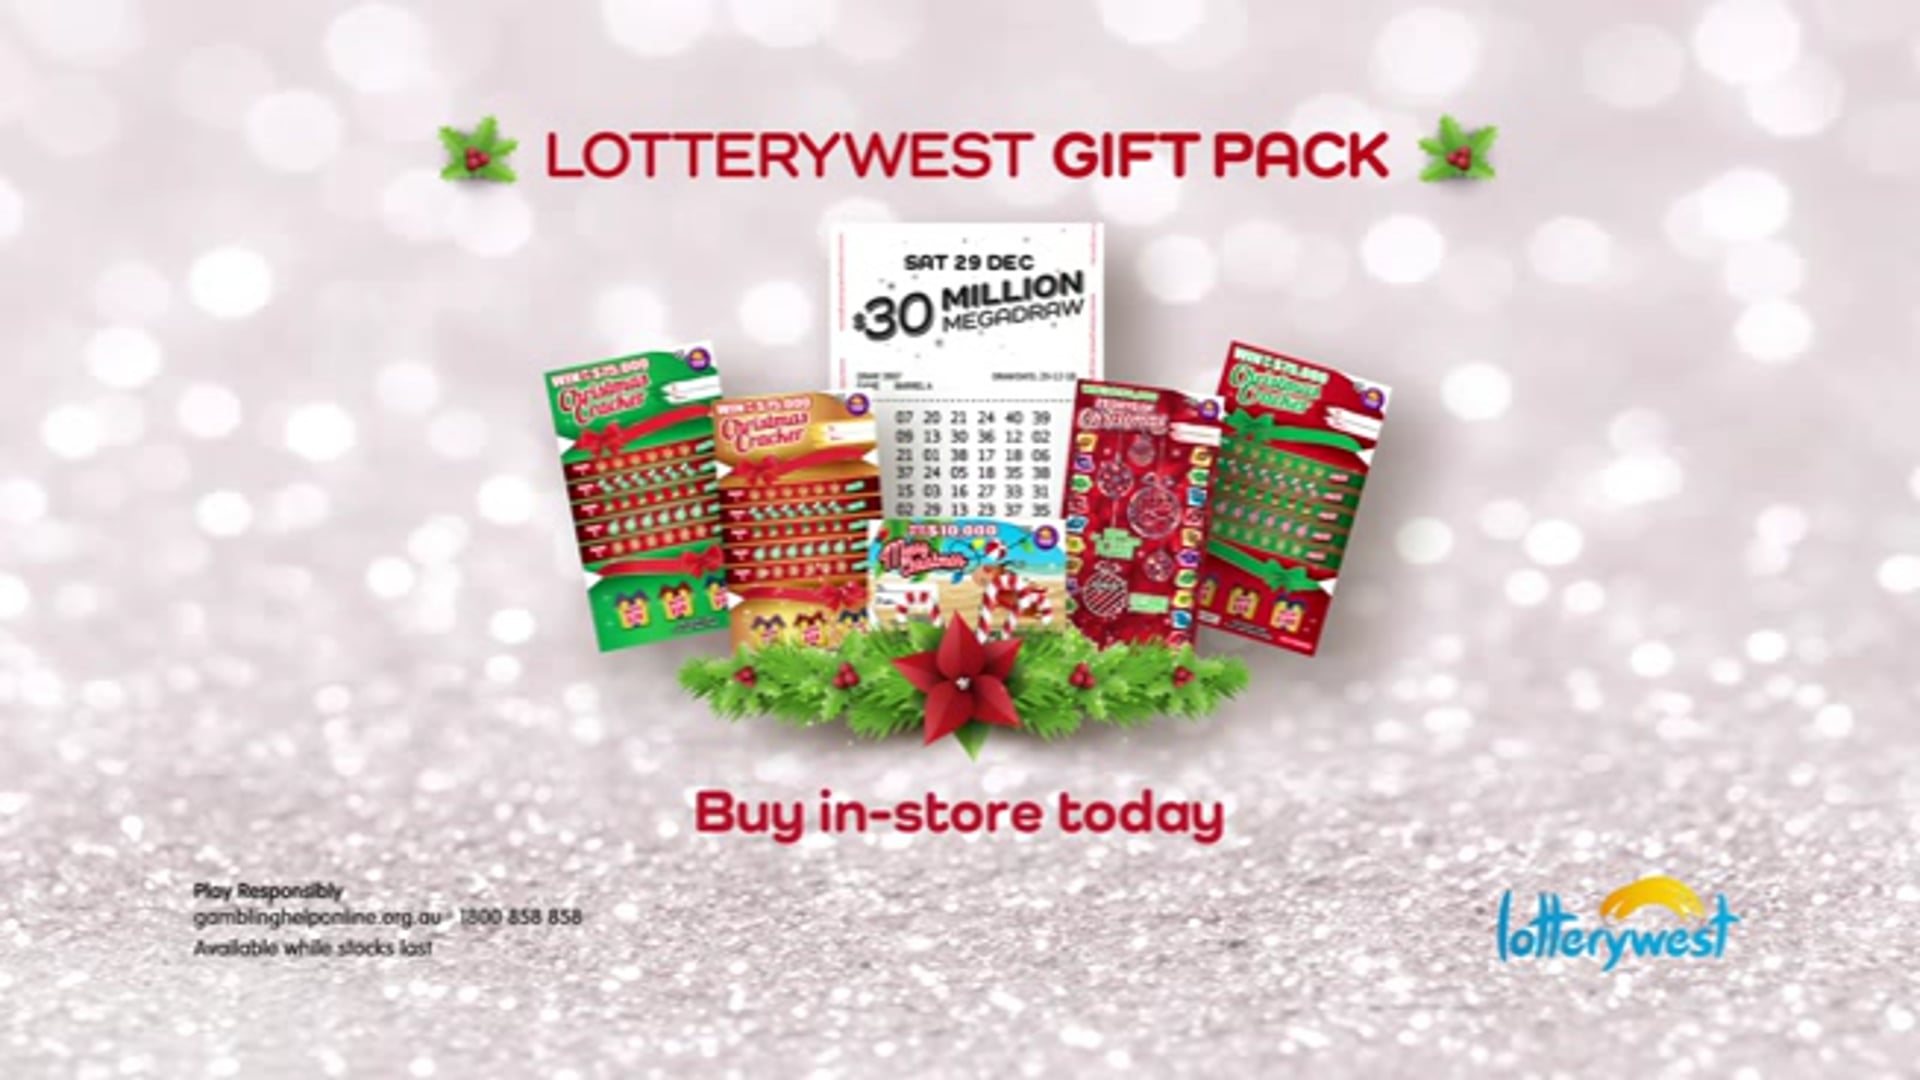 Lotterywest 'Christmas Shopping Trolley' - Music and Sound Design